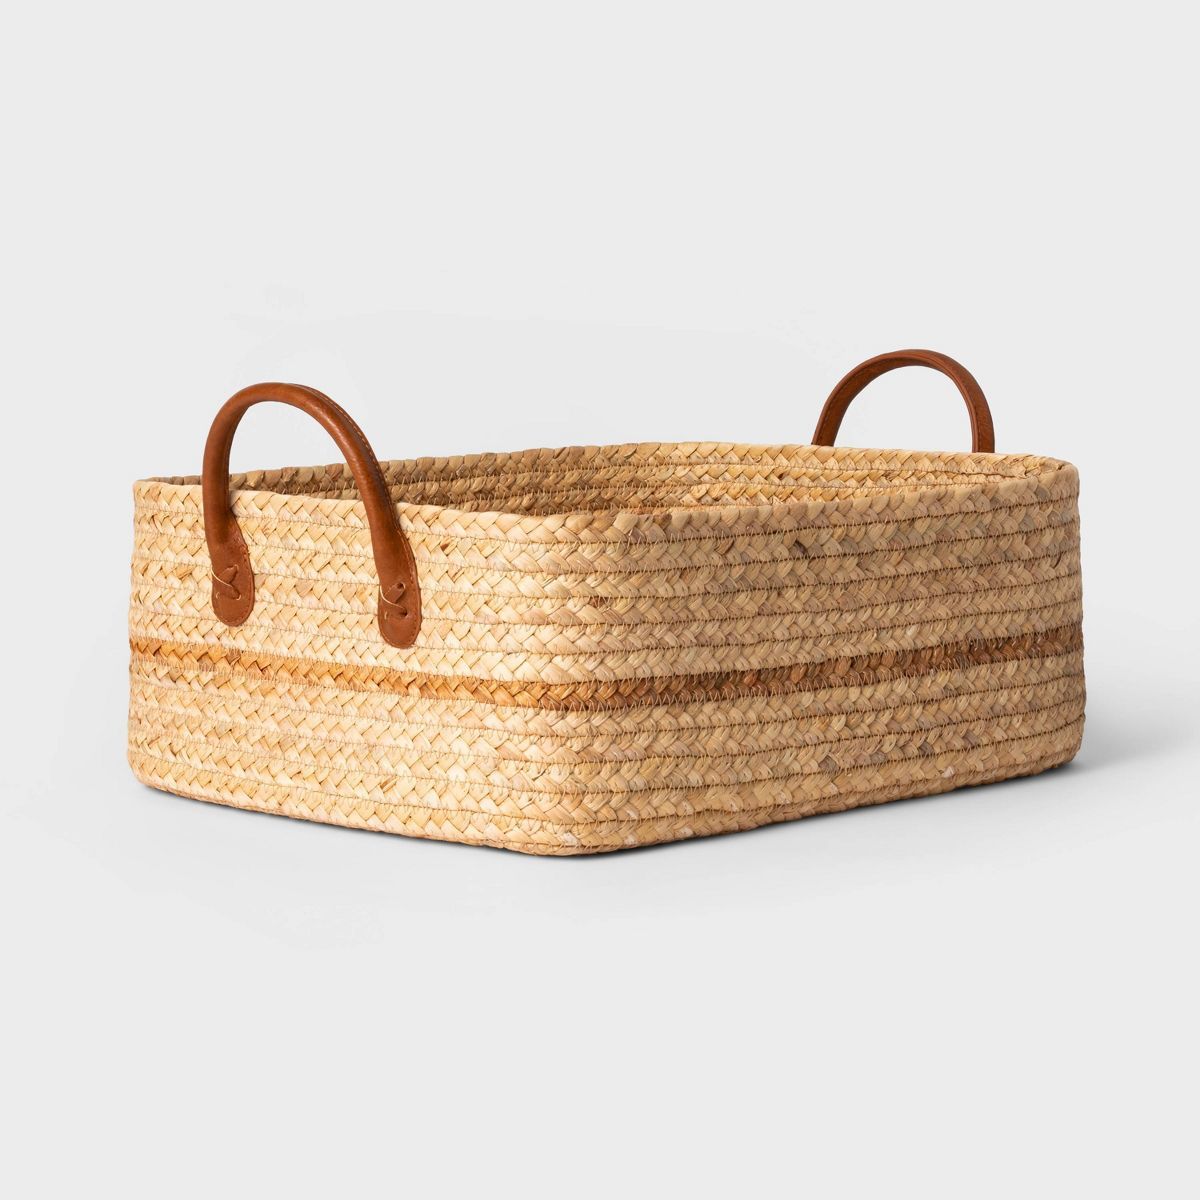 Braided Water Hyacinth Folio Basket with Faux Leather Handles - Threshold™ | Target